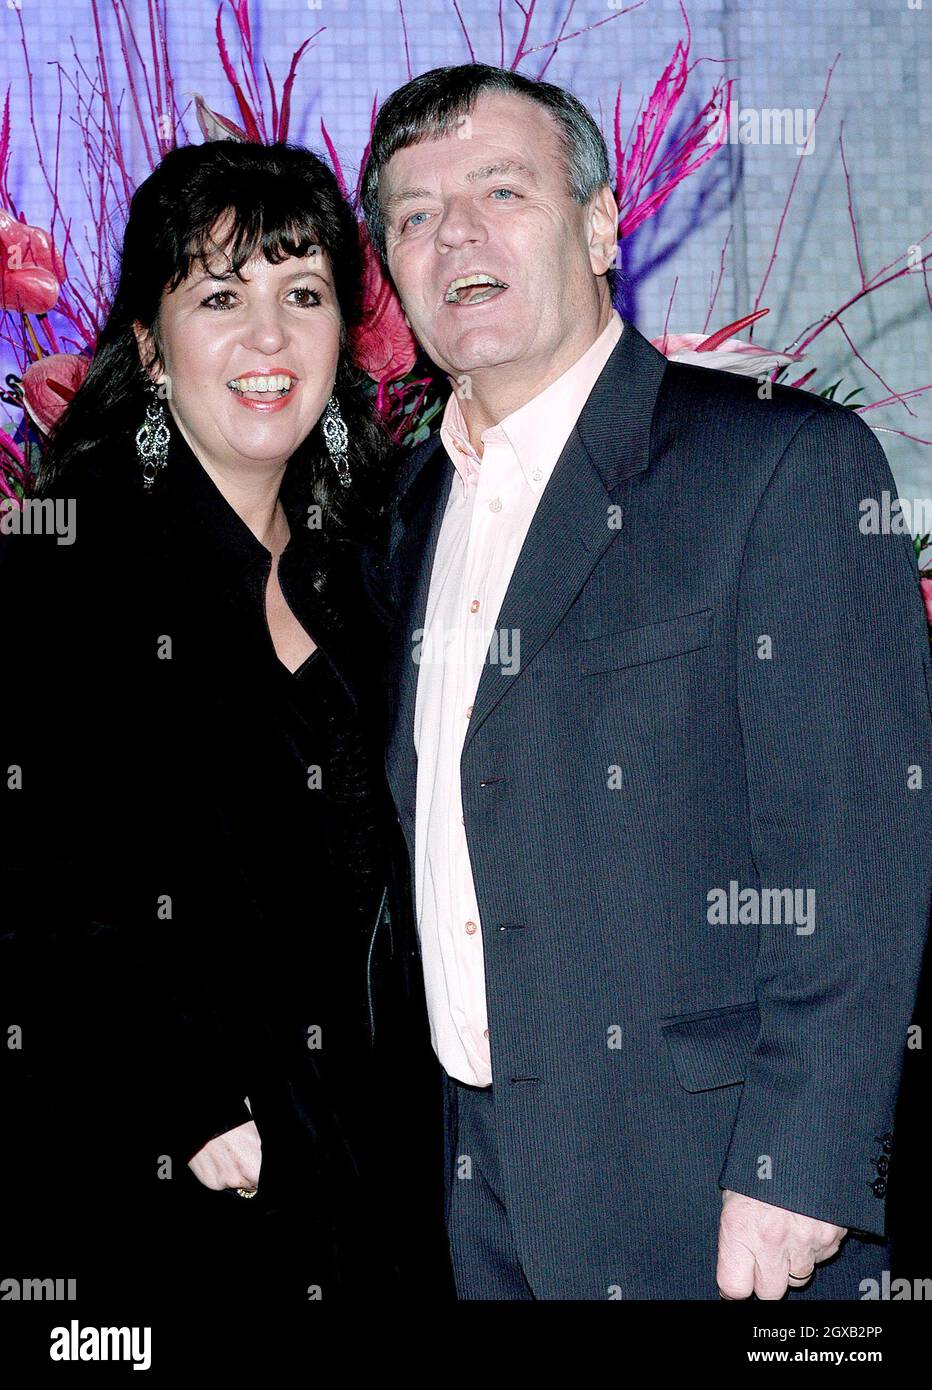 Tony Blackburn and wife arriving at The London Television Centre, London, on Tuesday 15 February, for 'An Audience with....Joe Pasquale'. Stock Photo